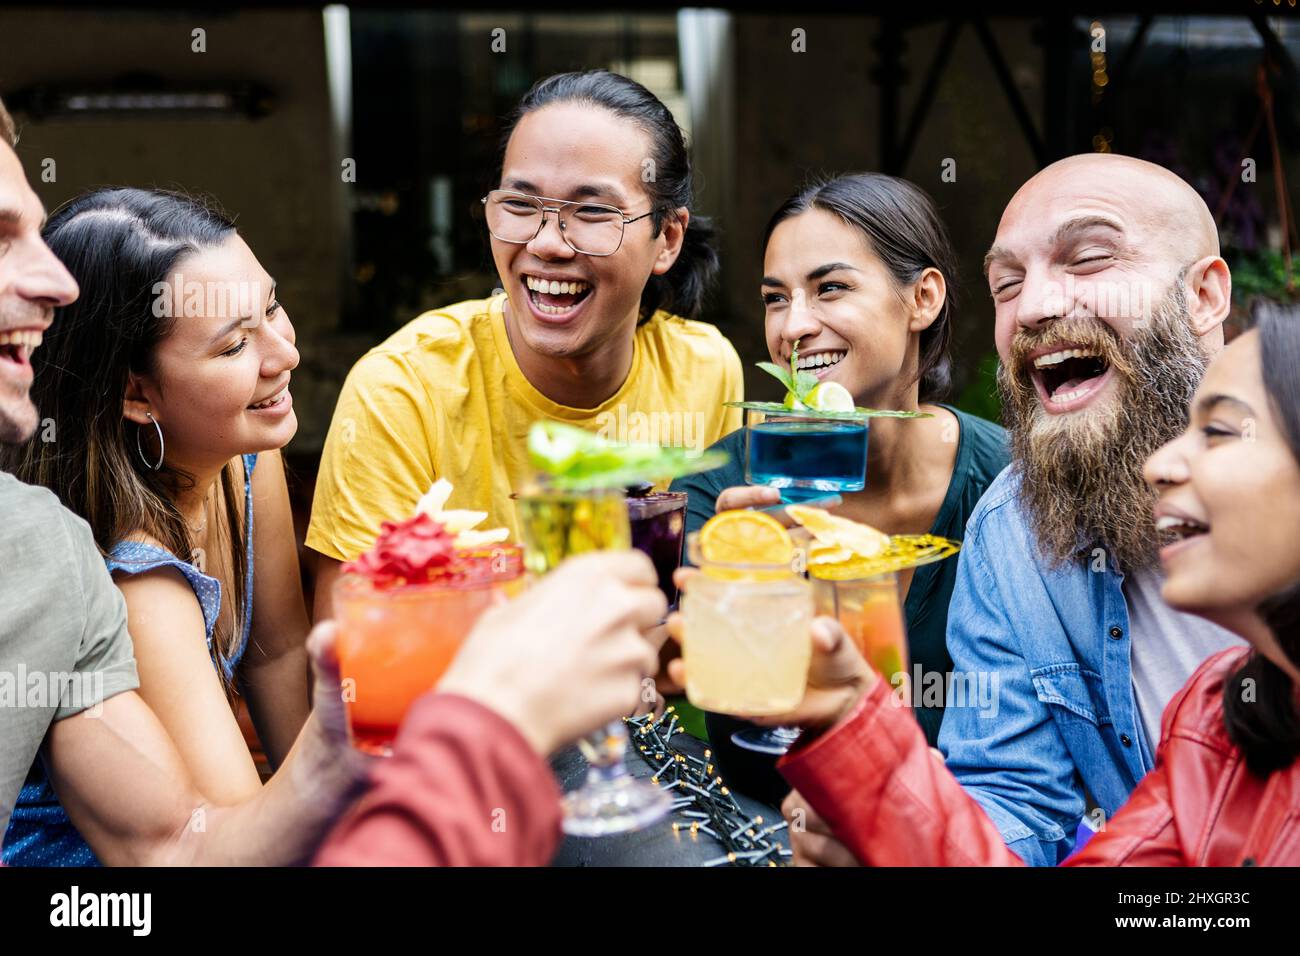 Millennial people having fun while social gathering together at weekend party Stock Photo